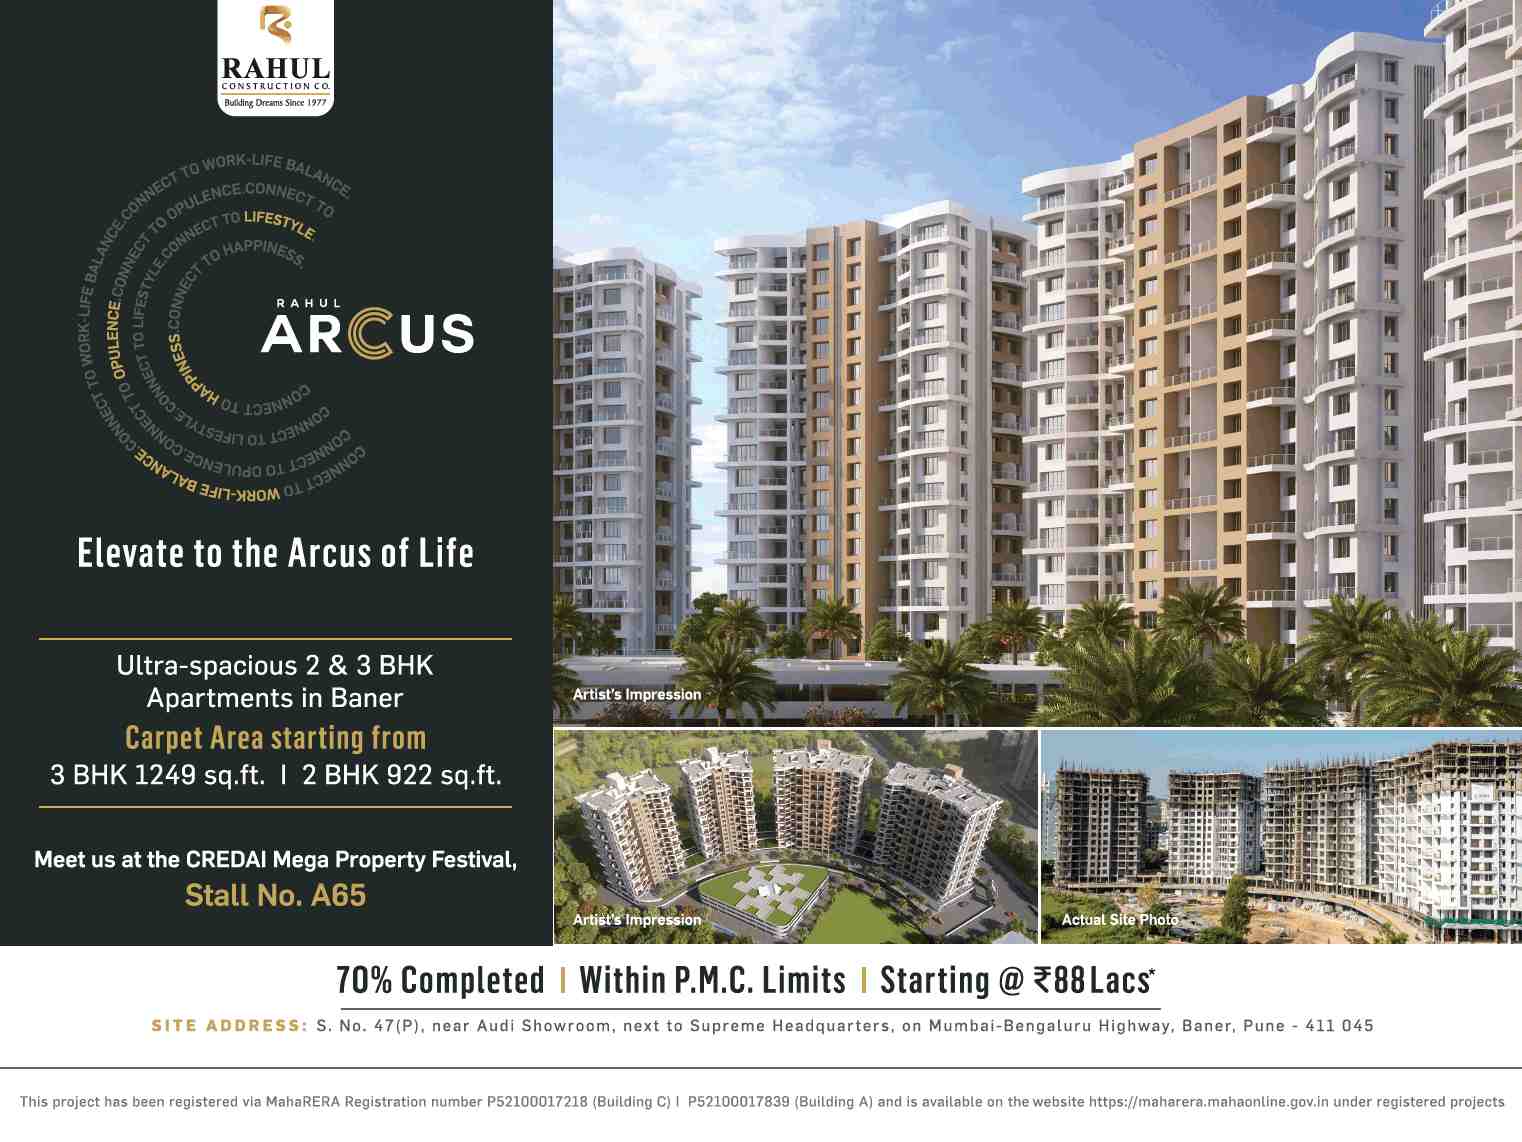 Book ultra spacious 2 & 3 BHK @ Rs 88 Lacs at Rahul Arcus in Baner, Pune Update